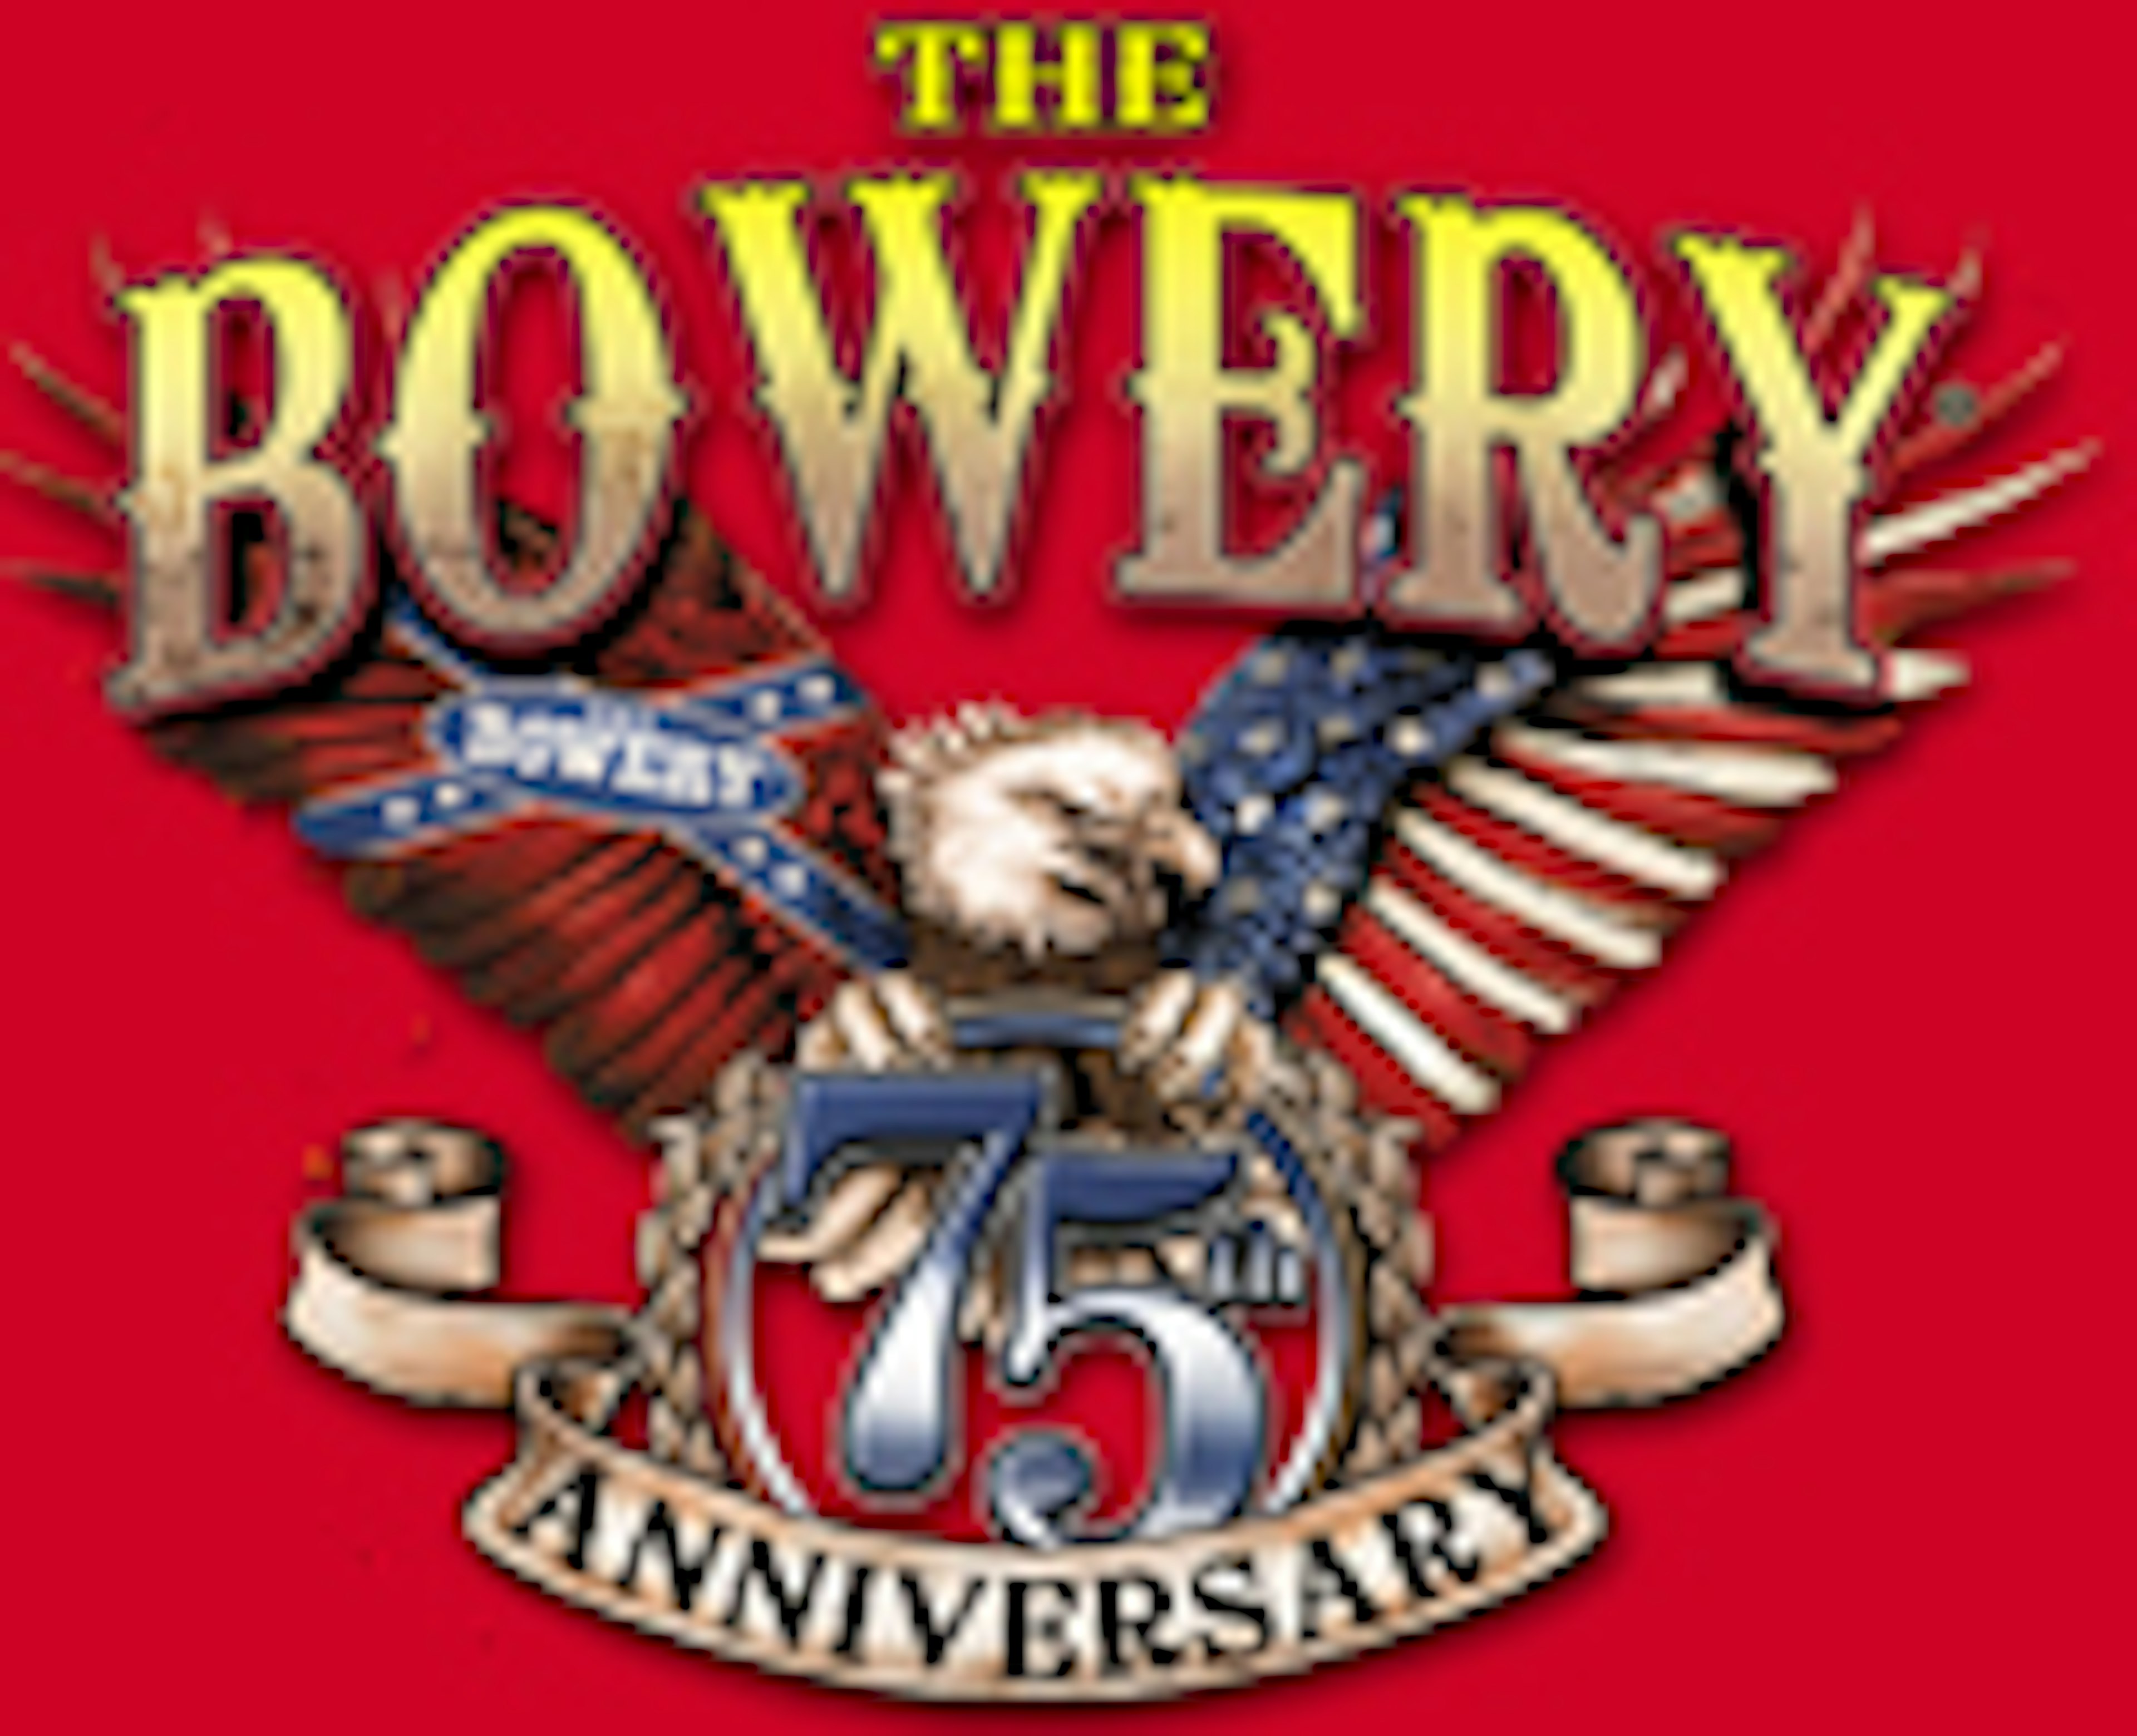 The Bowery